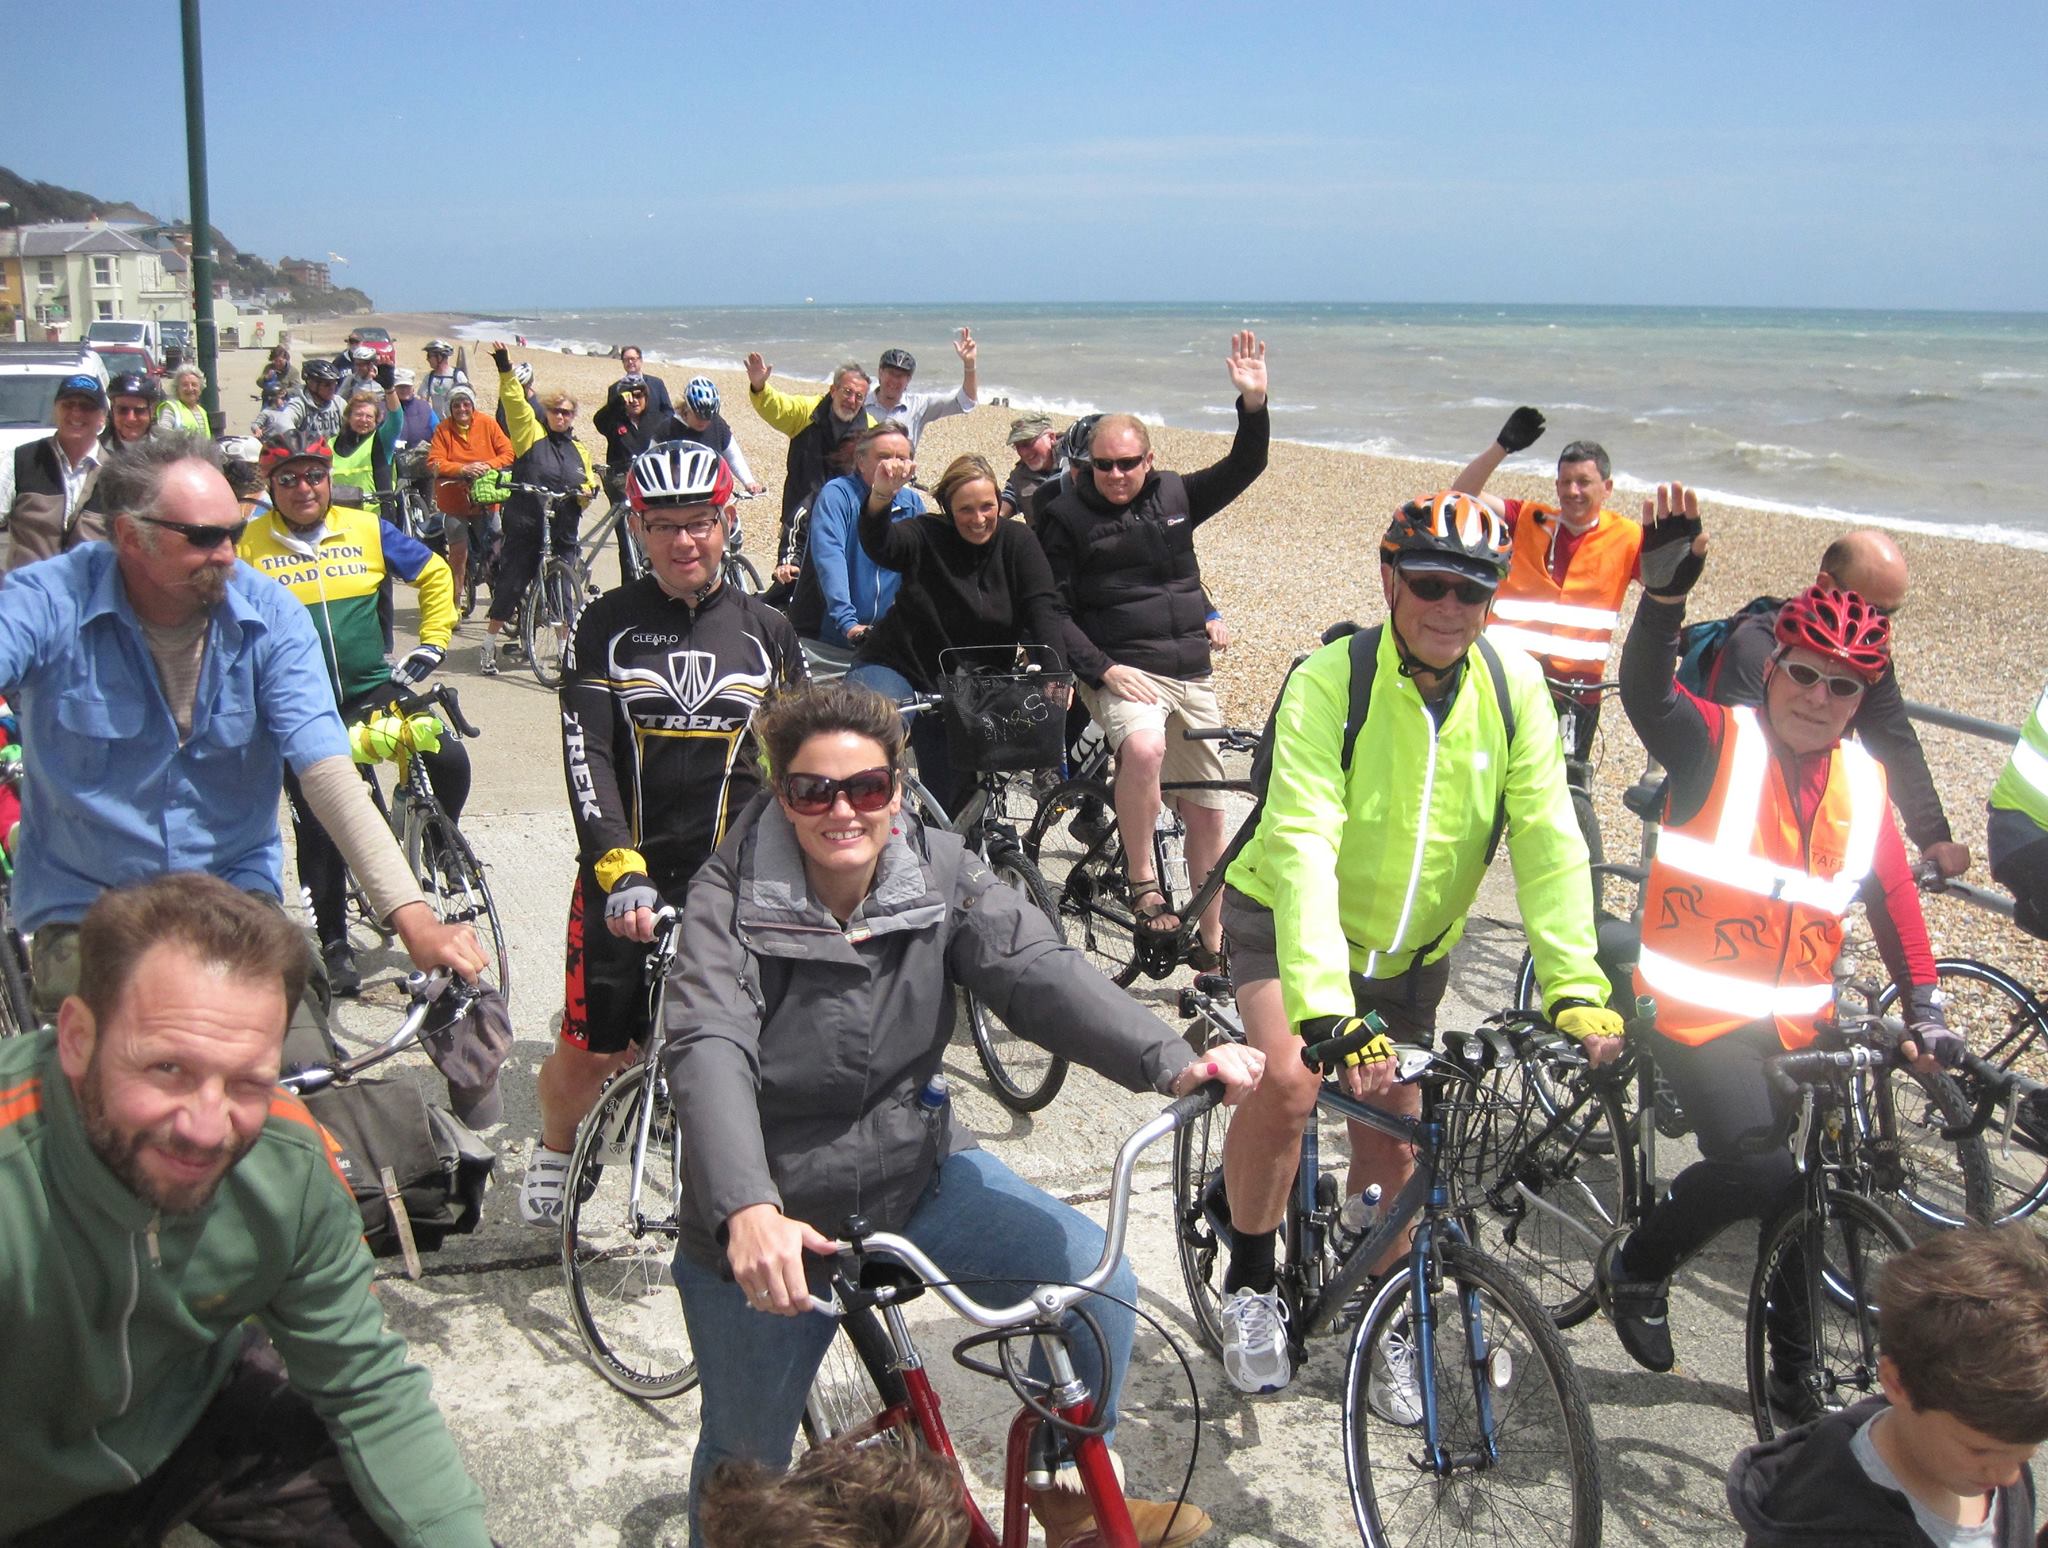 CySy Ride to celebrate the Cinque Ports Cycleway